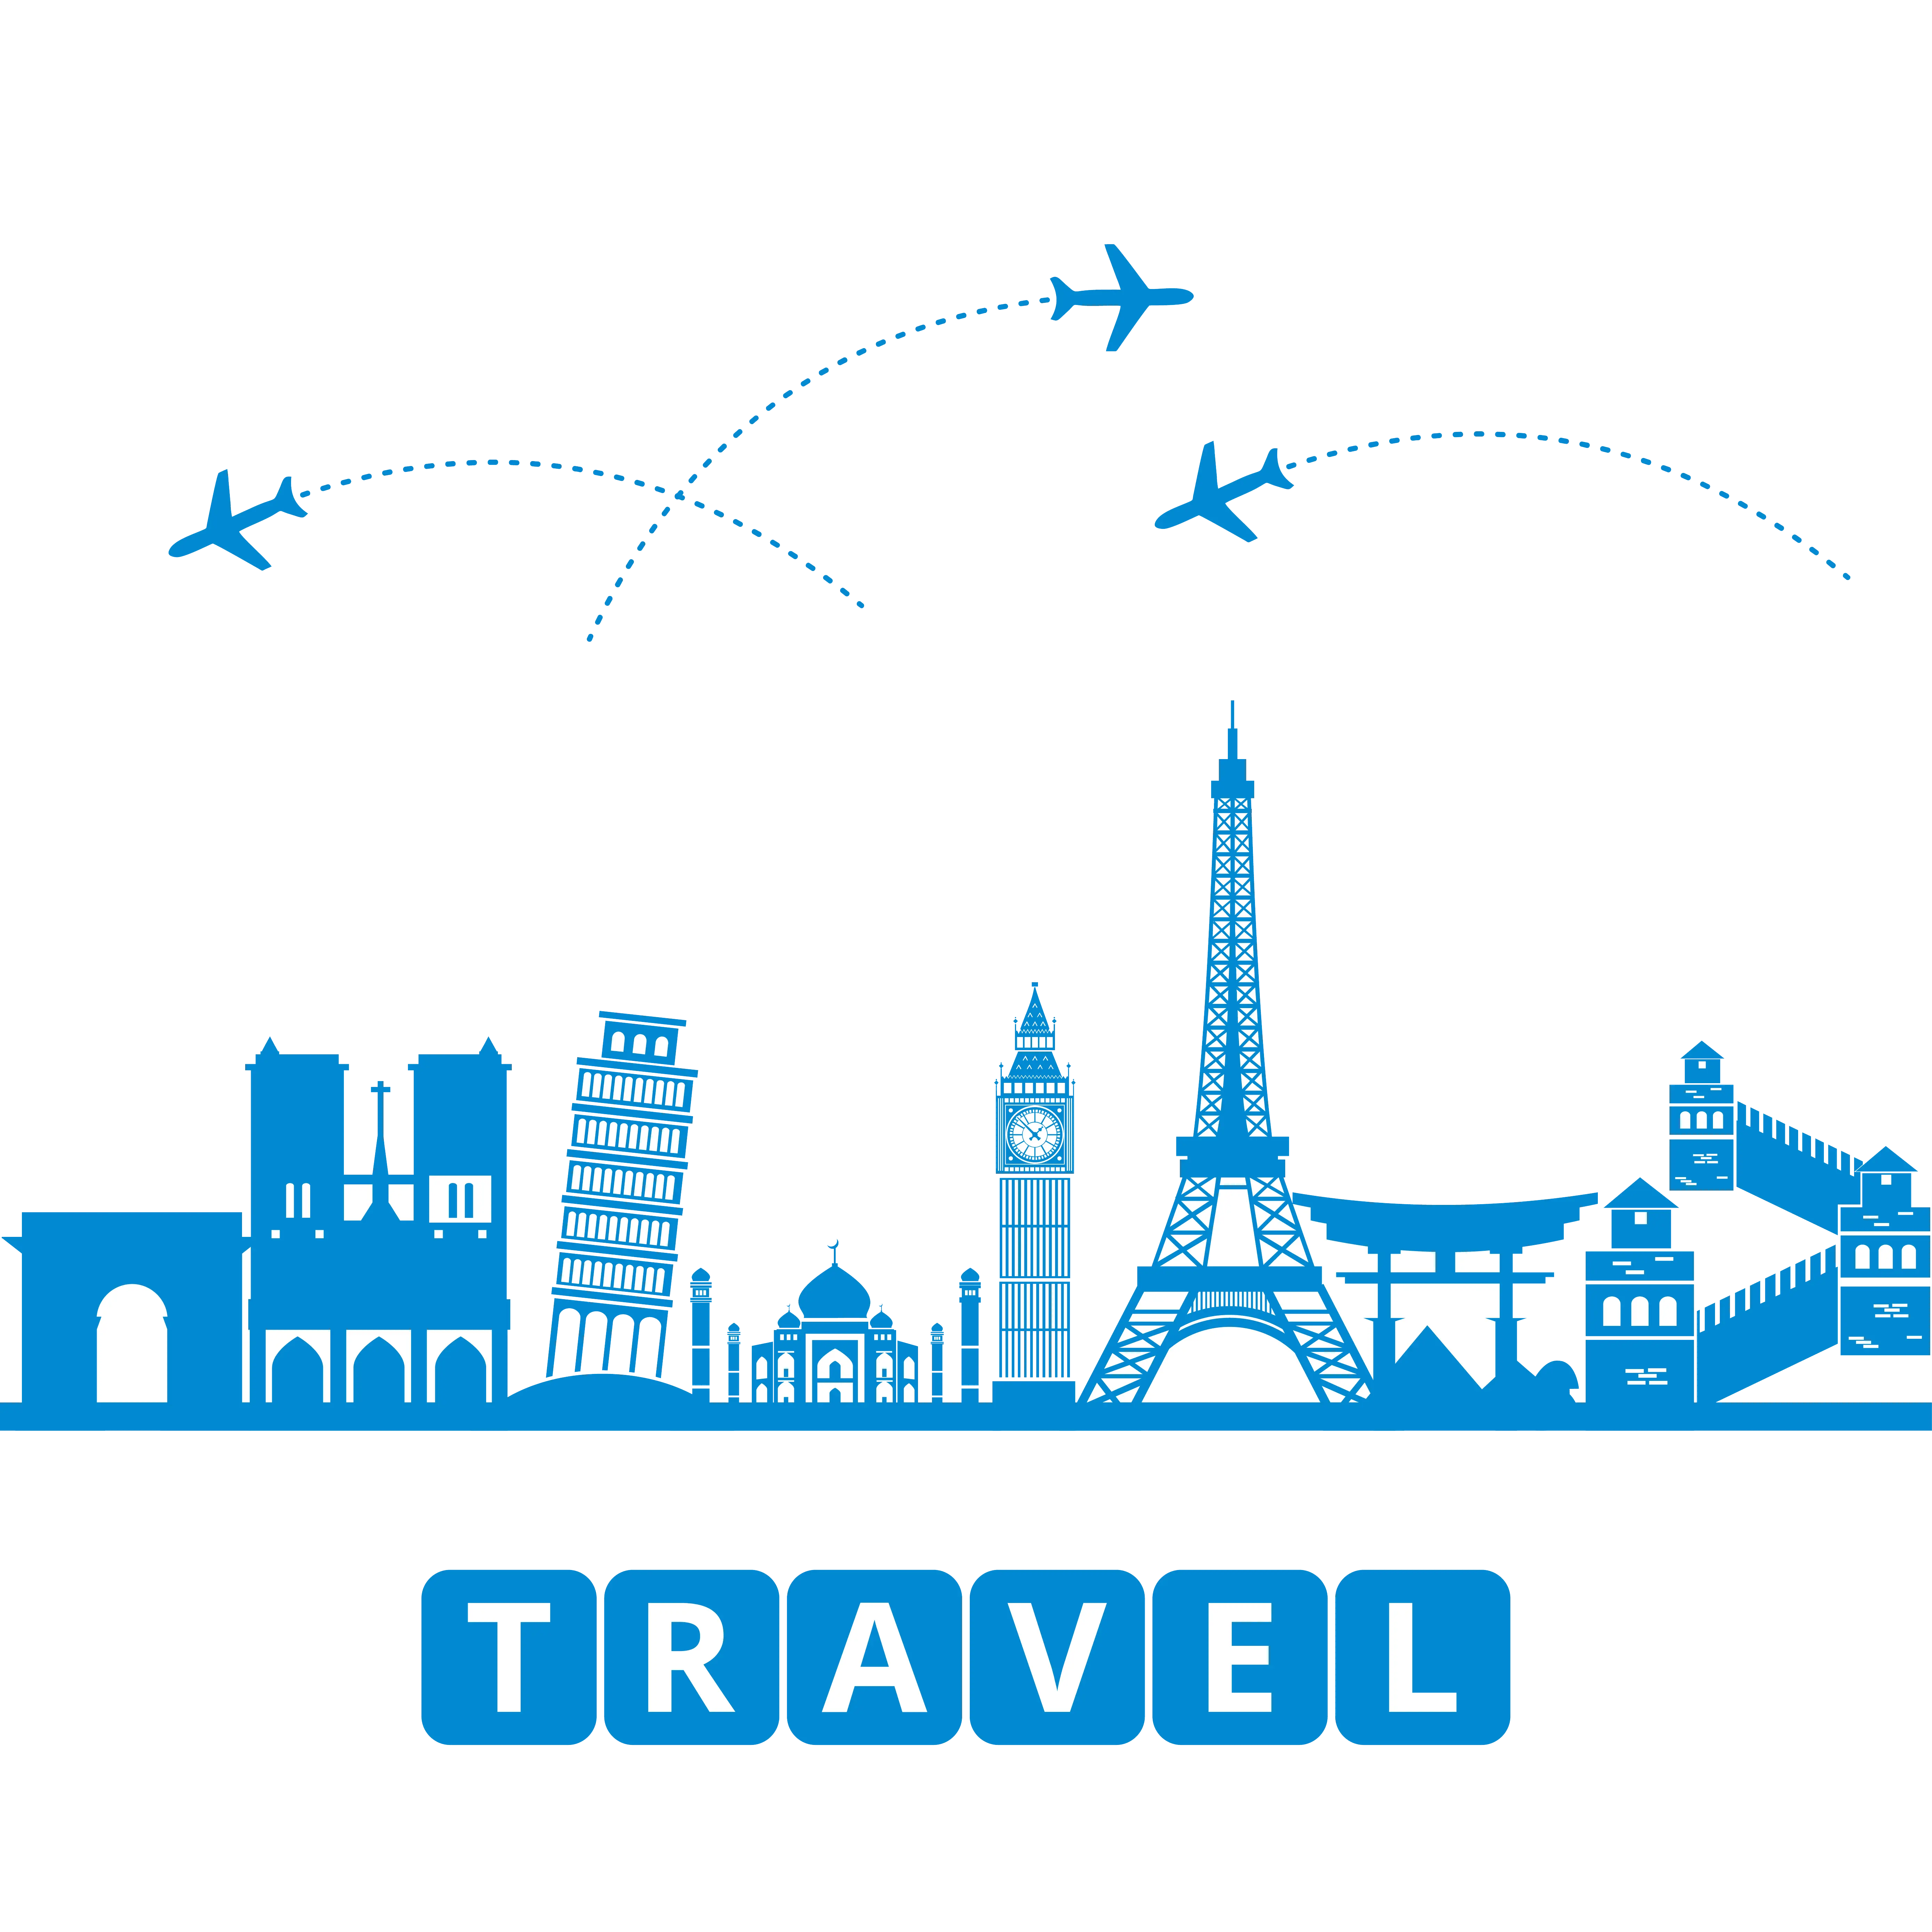 Tours & Travels Software